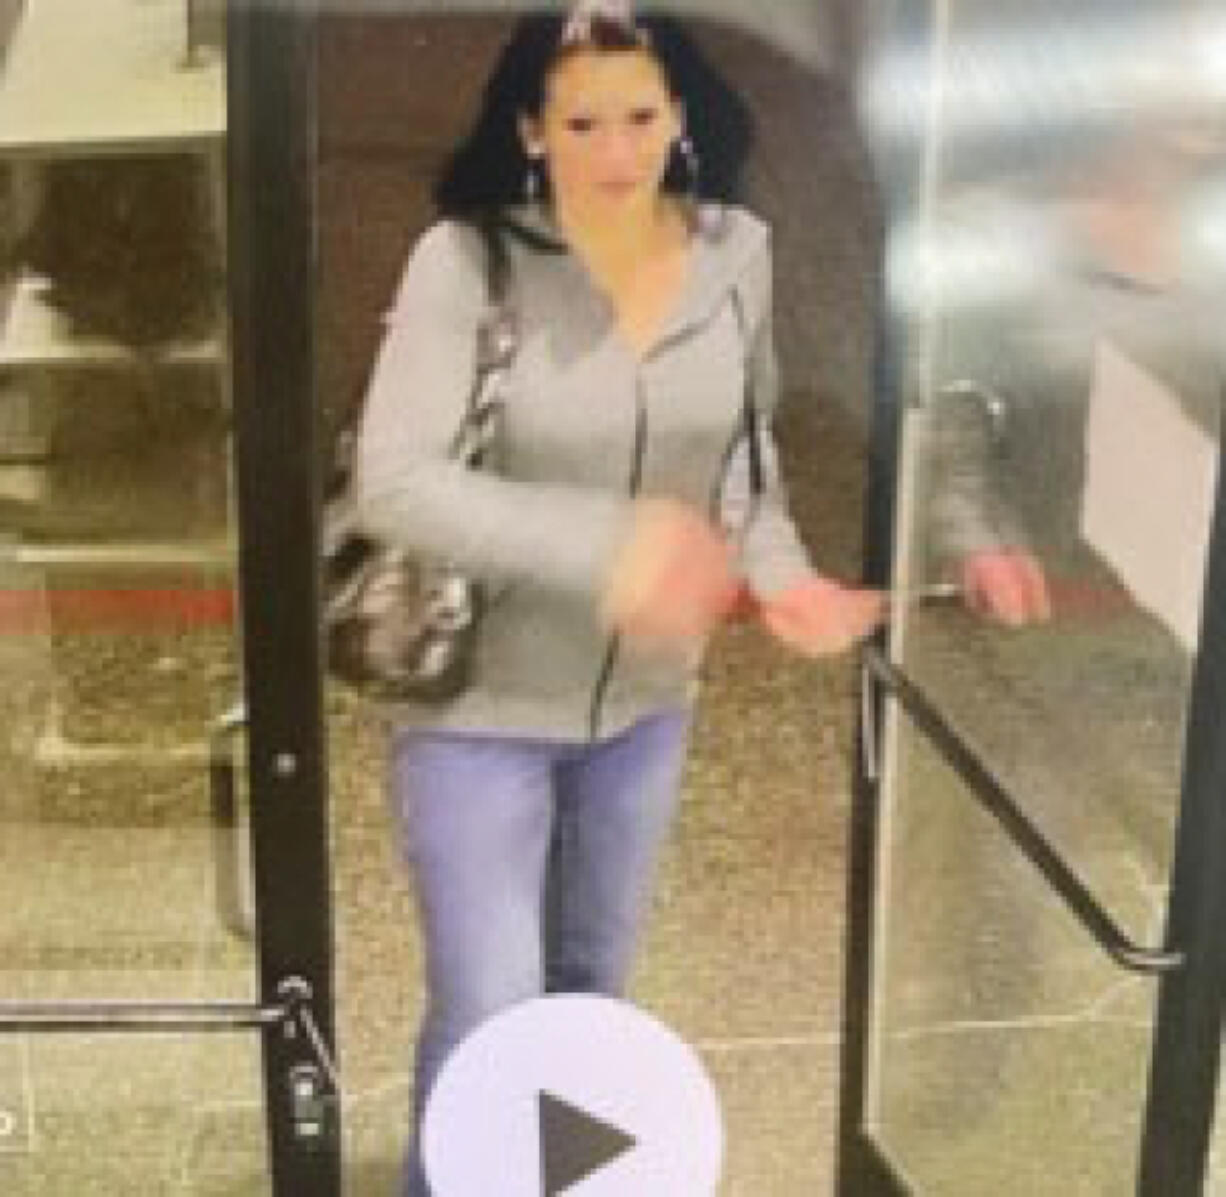 A woman police are seeking to identify in connection with a Tuesday robbery at Plato's Closet in the VanMall neighborhood.